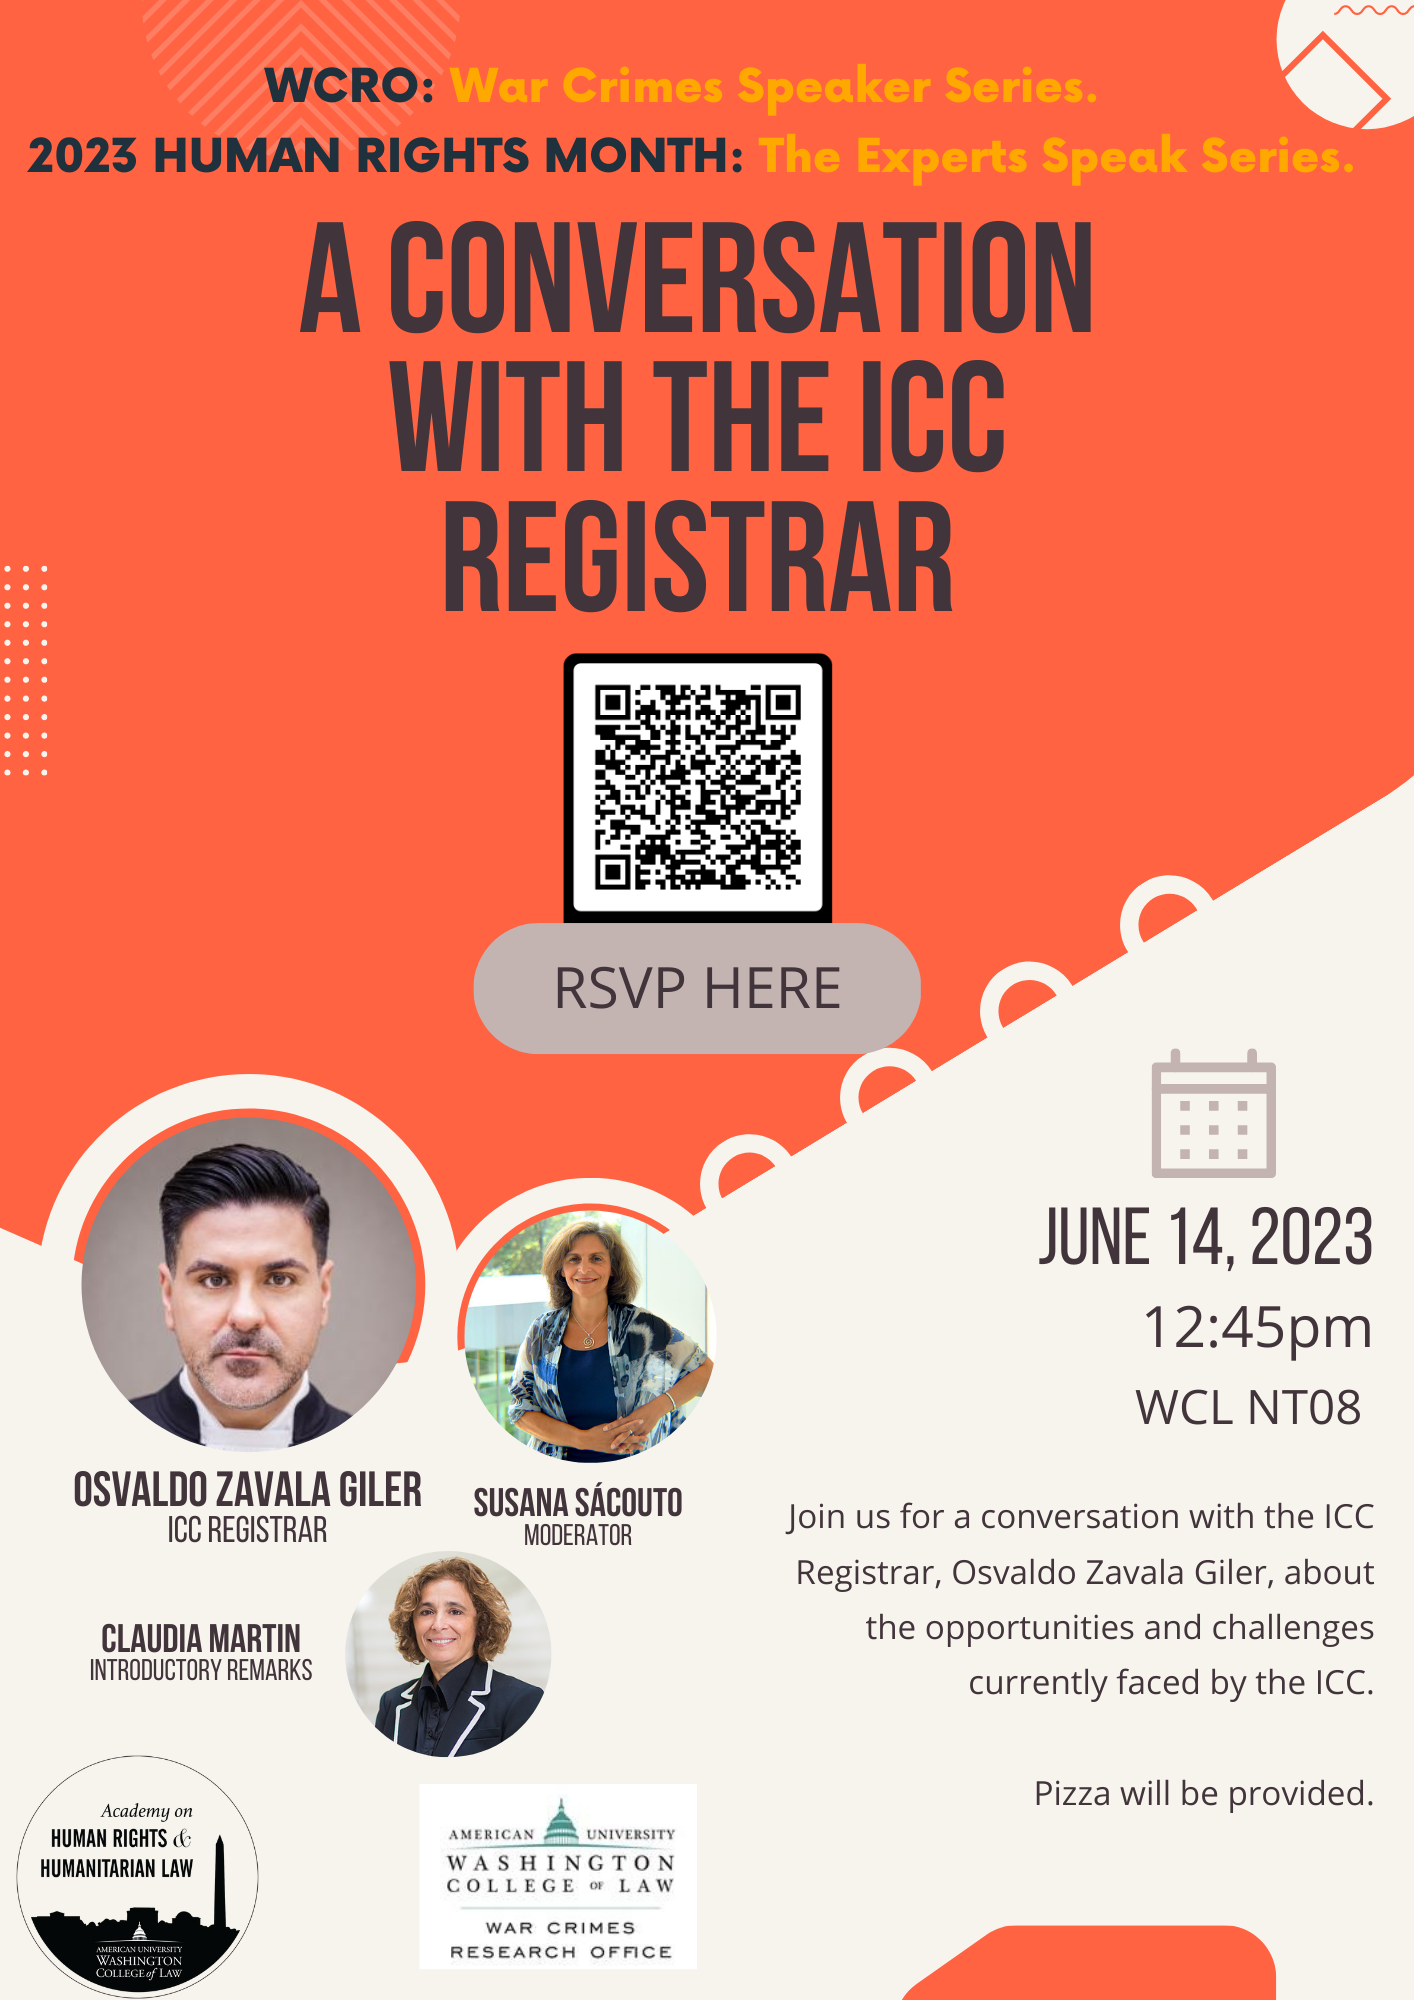 WCRO and Academy Present "A Conversation with the ICC Registrar"